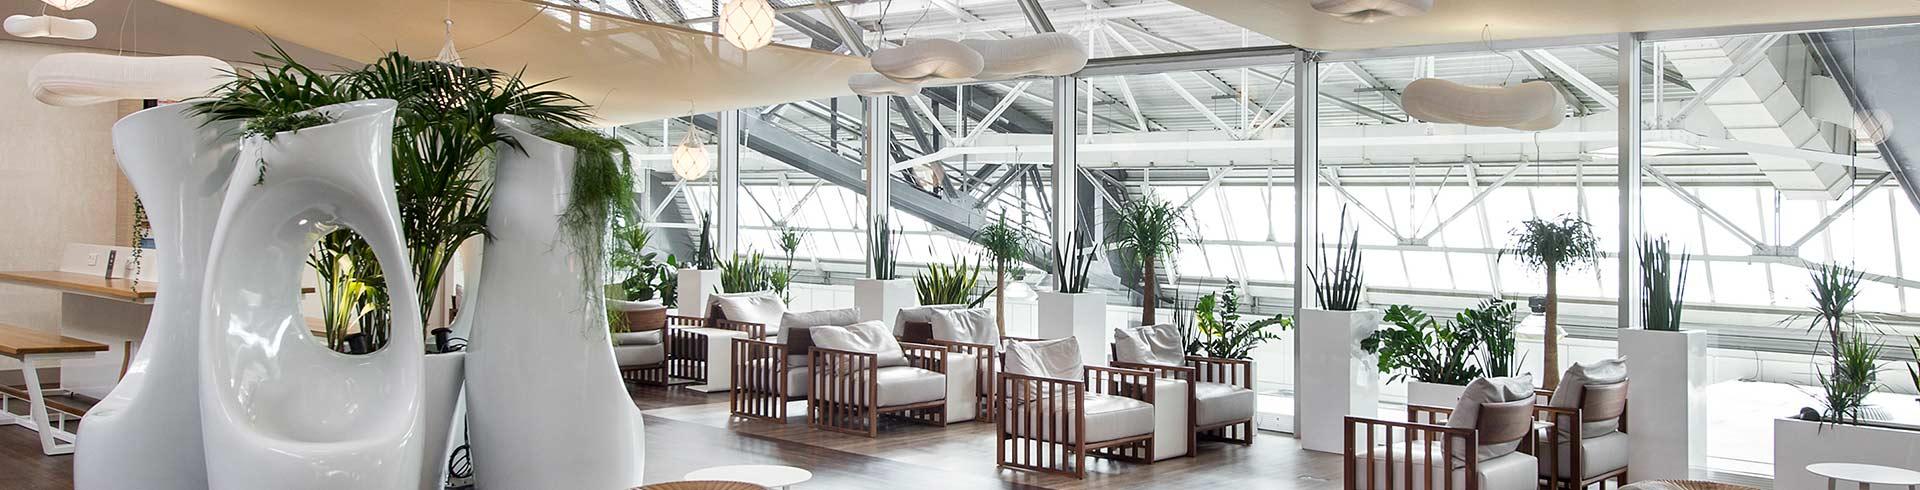 Nice Côte d’Azur airport chooses Moment to offer an entertainment platform in its VIP lounges